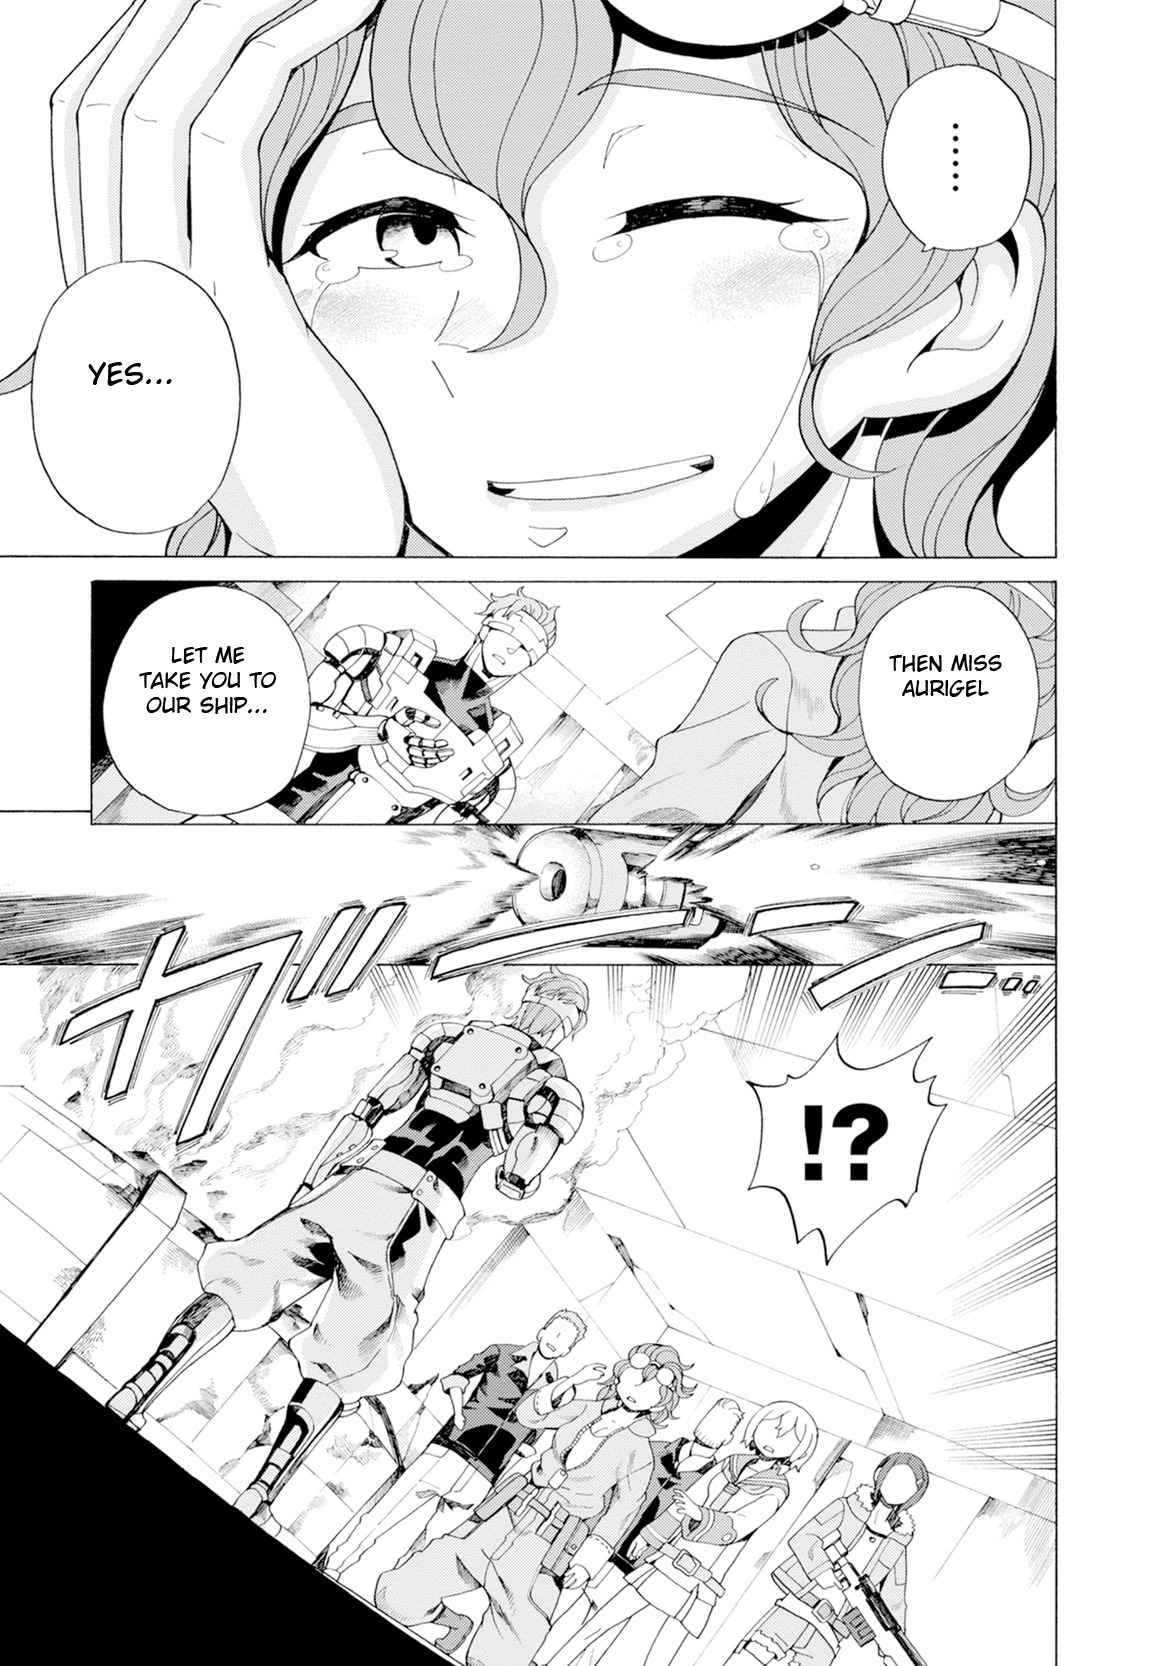 Asebi and Adventurers of Sky World Vol. 6 Ch. 32 Decision and battle start